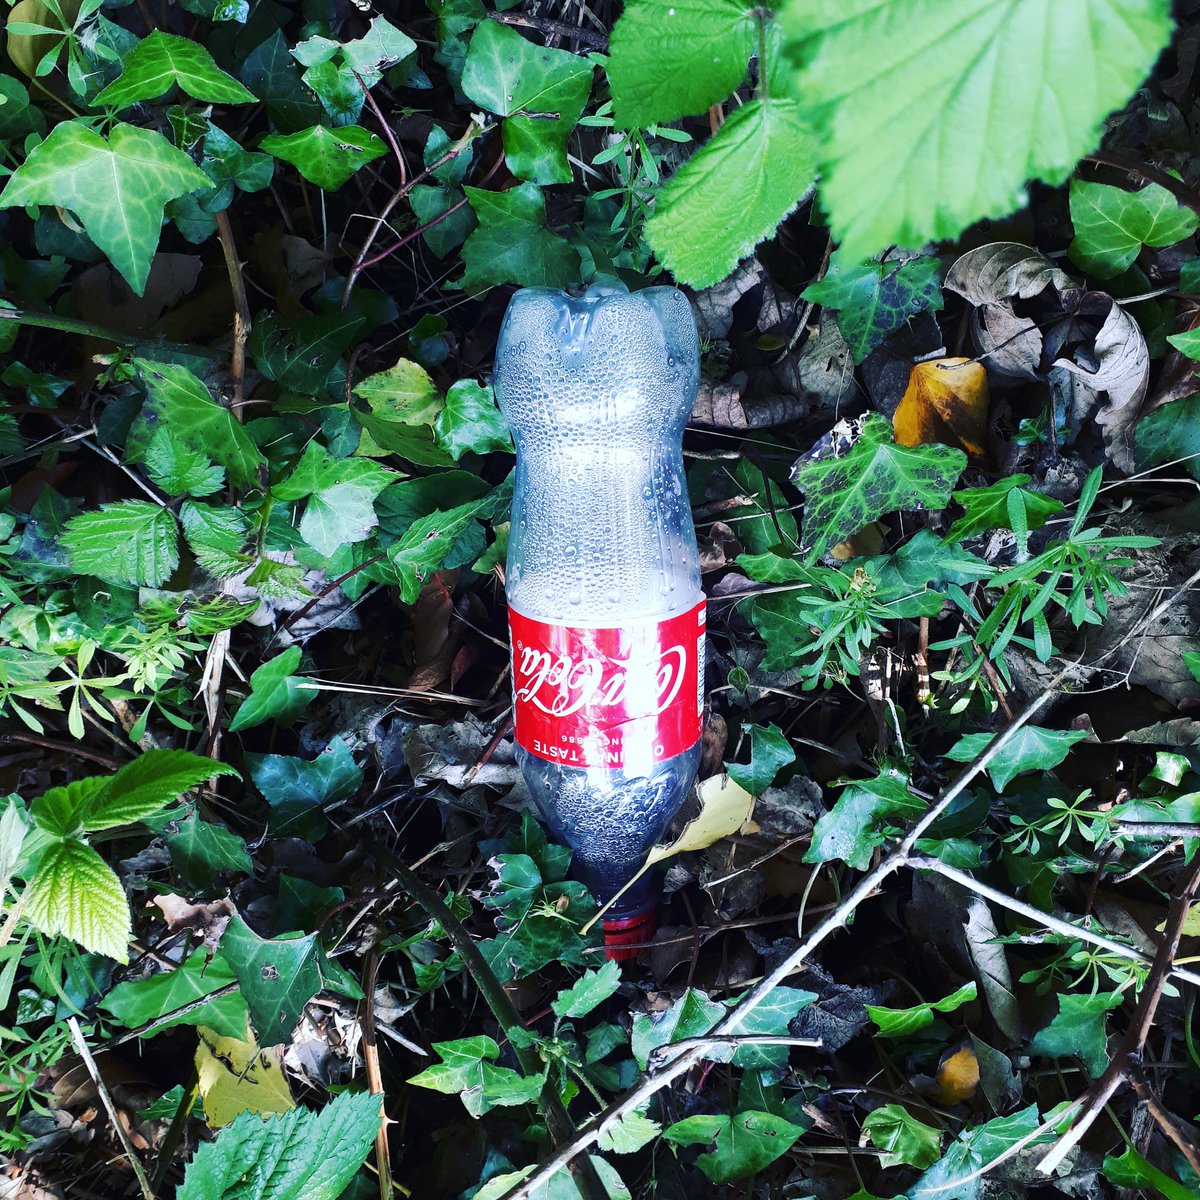 Hey @cocacola your drinks bottles keep finding their way into bushes and our local beauty spots. When are you going to start pumping out less plastic pollution? #ReturnToOffender
#PlasticFreeCommunities #PlasticFreeCommunities #SeeIt #SnapIt #ShareIt